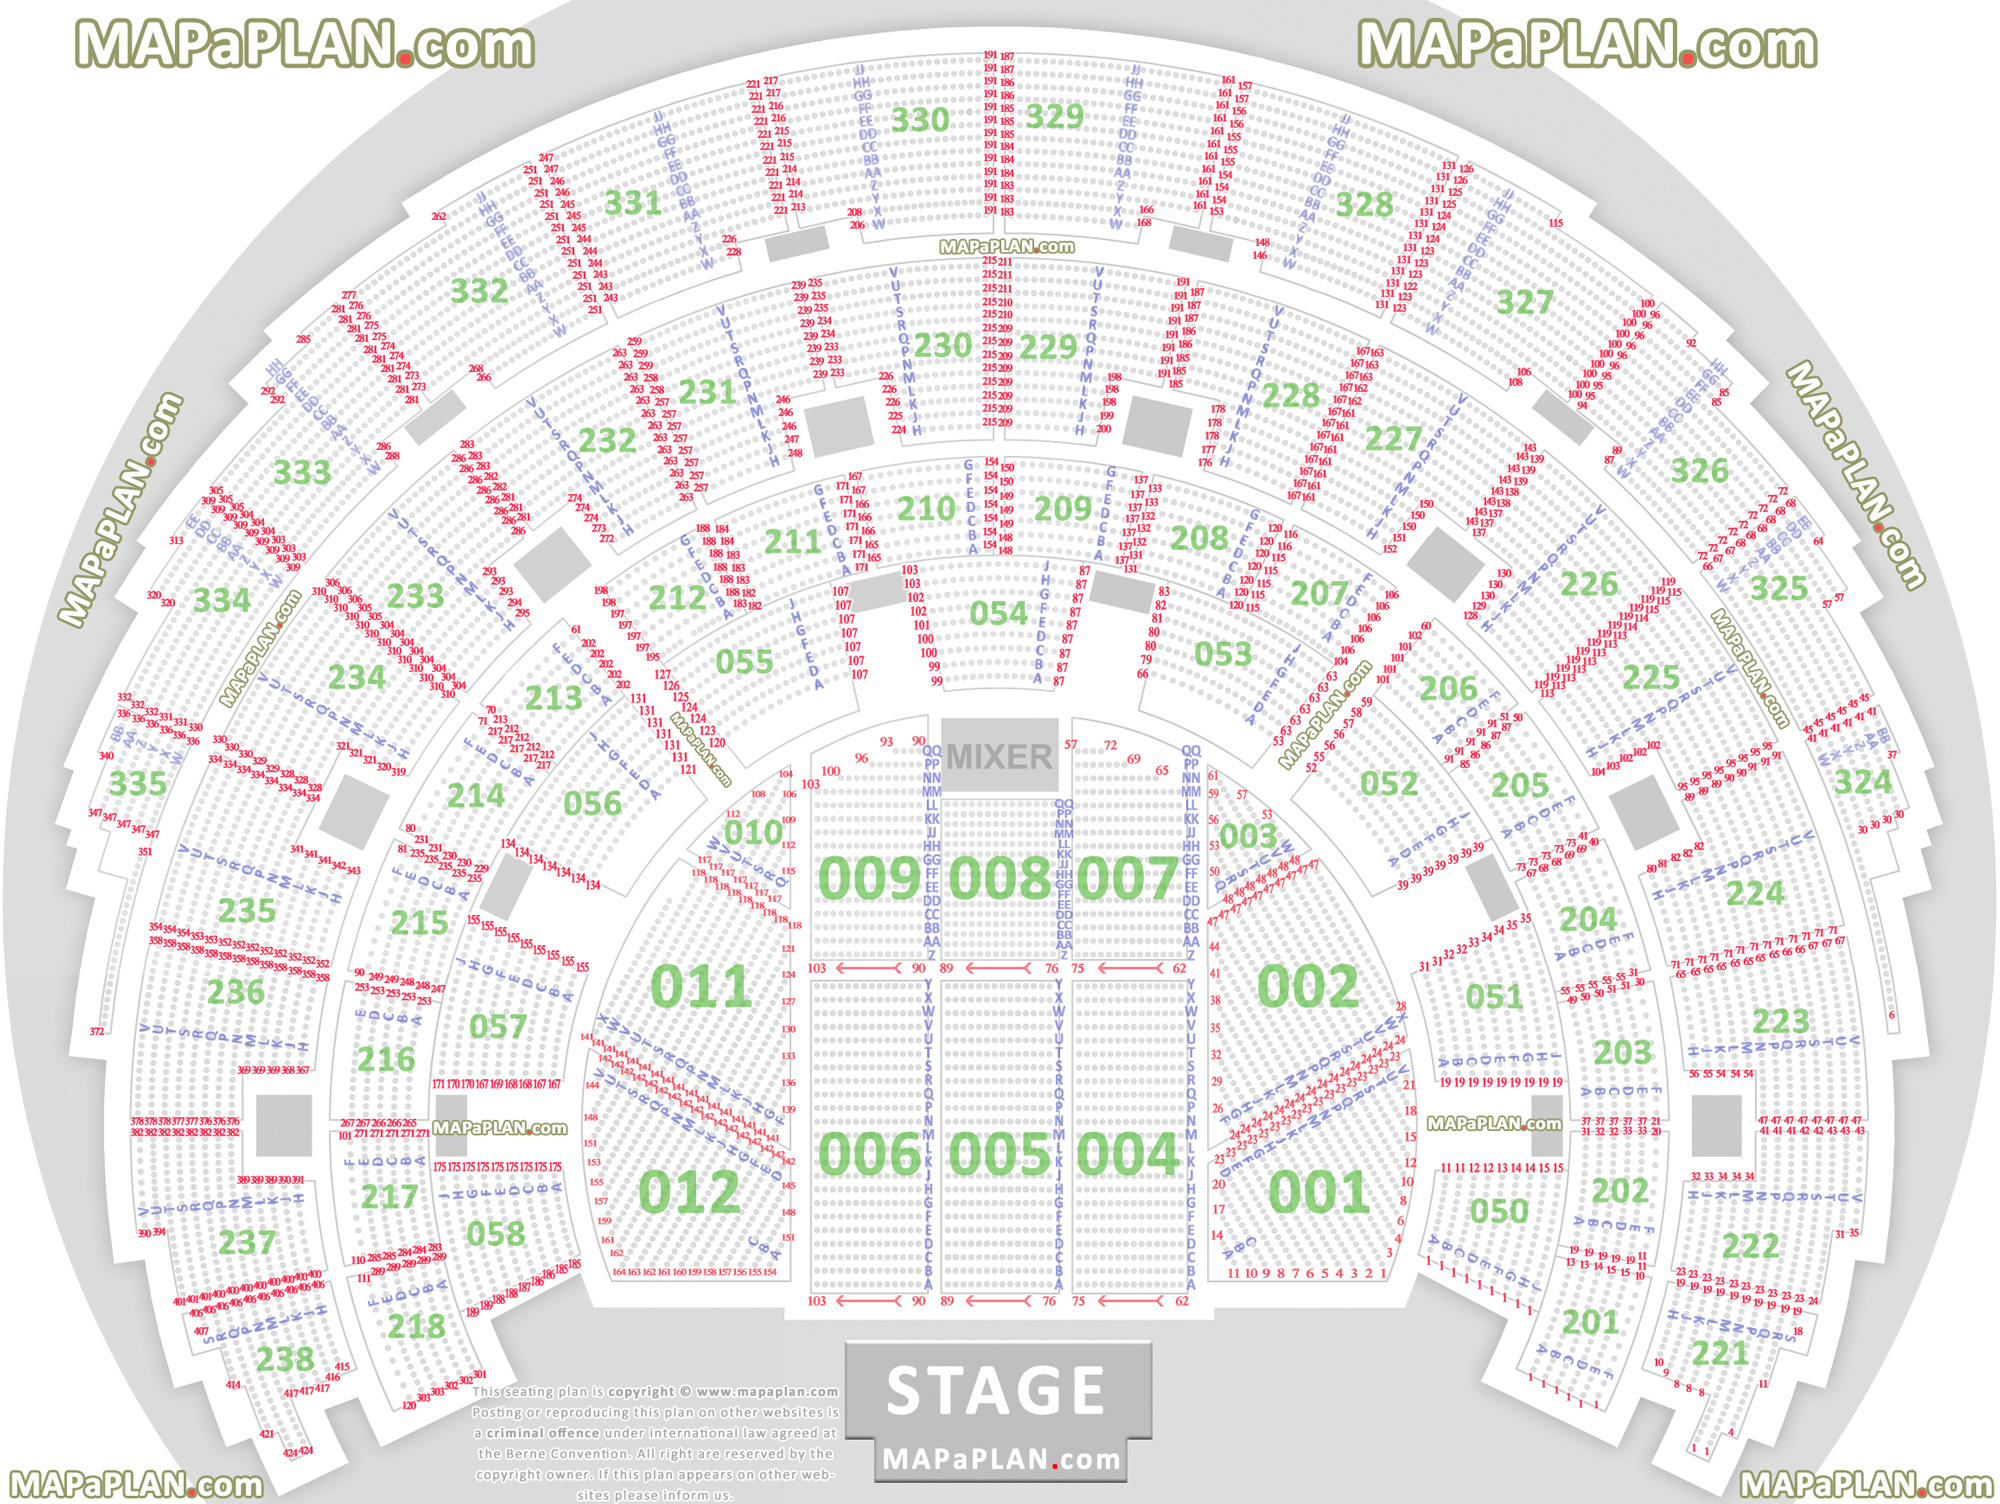 Detailed Seat Numbers Chart With Rows And Blocks Layout Hydro Sse Arena Glasgow